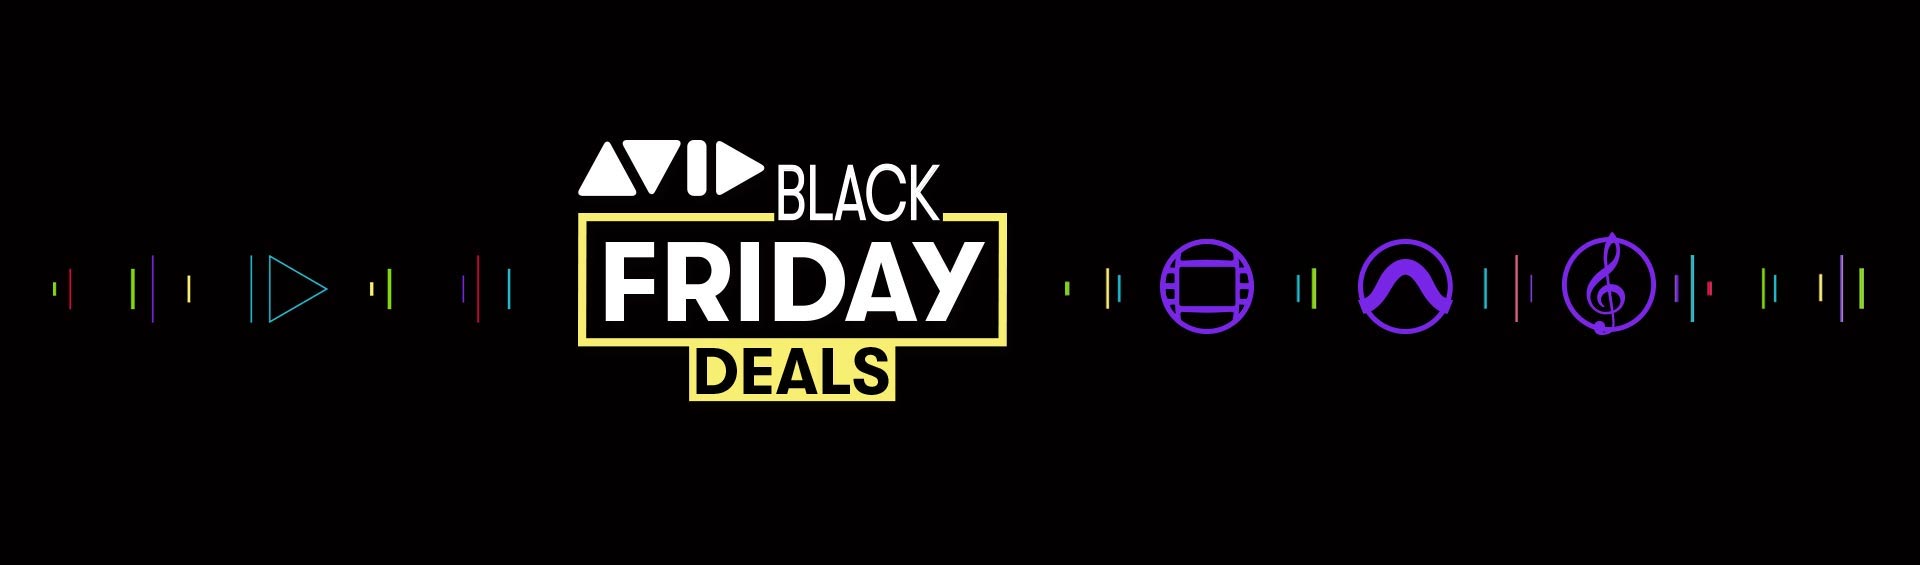 PVC’s Black Friday 2020 best deals: here are some more bargains